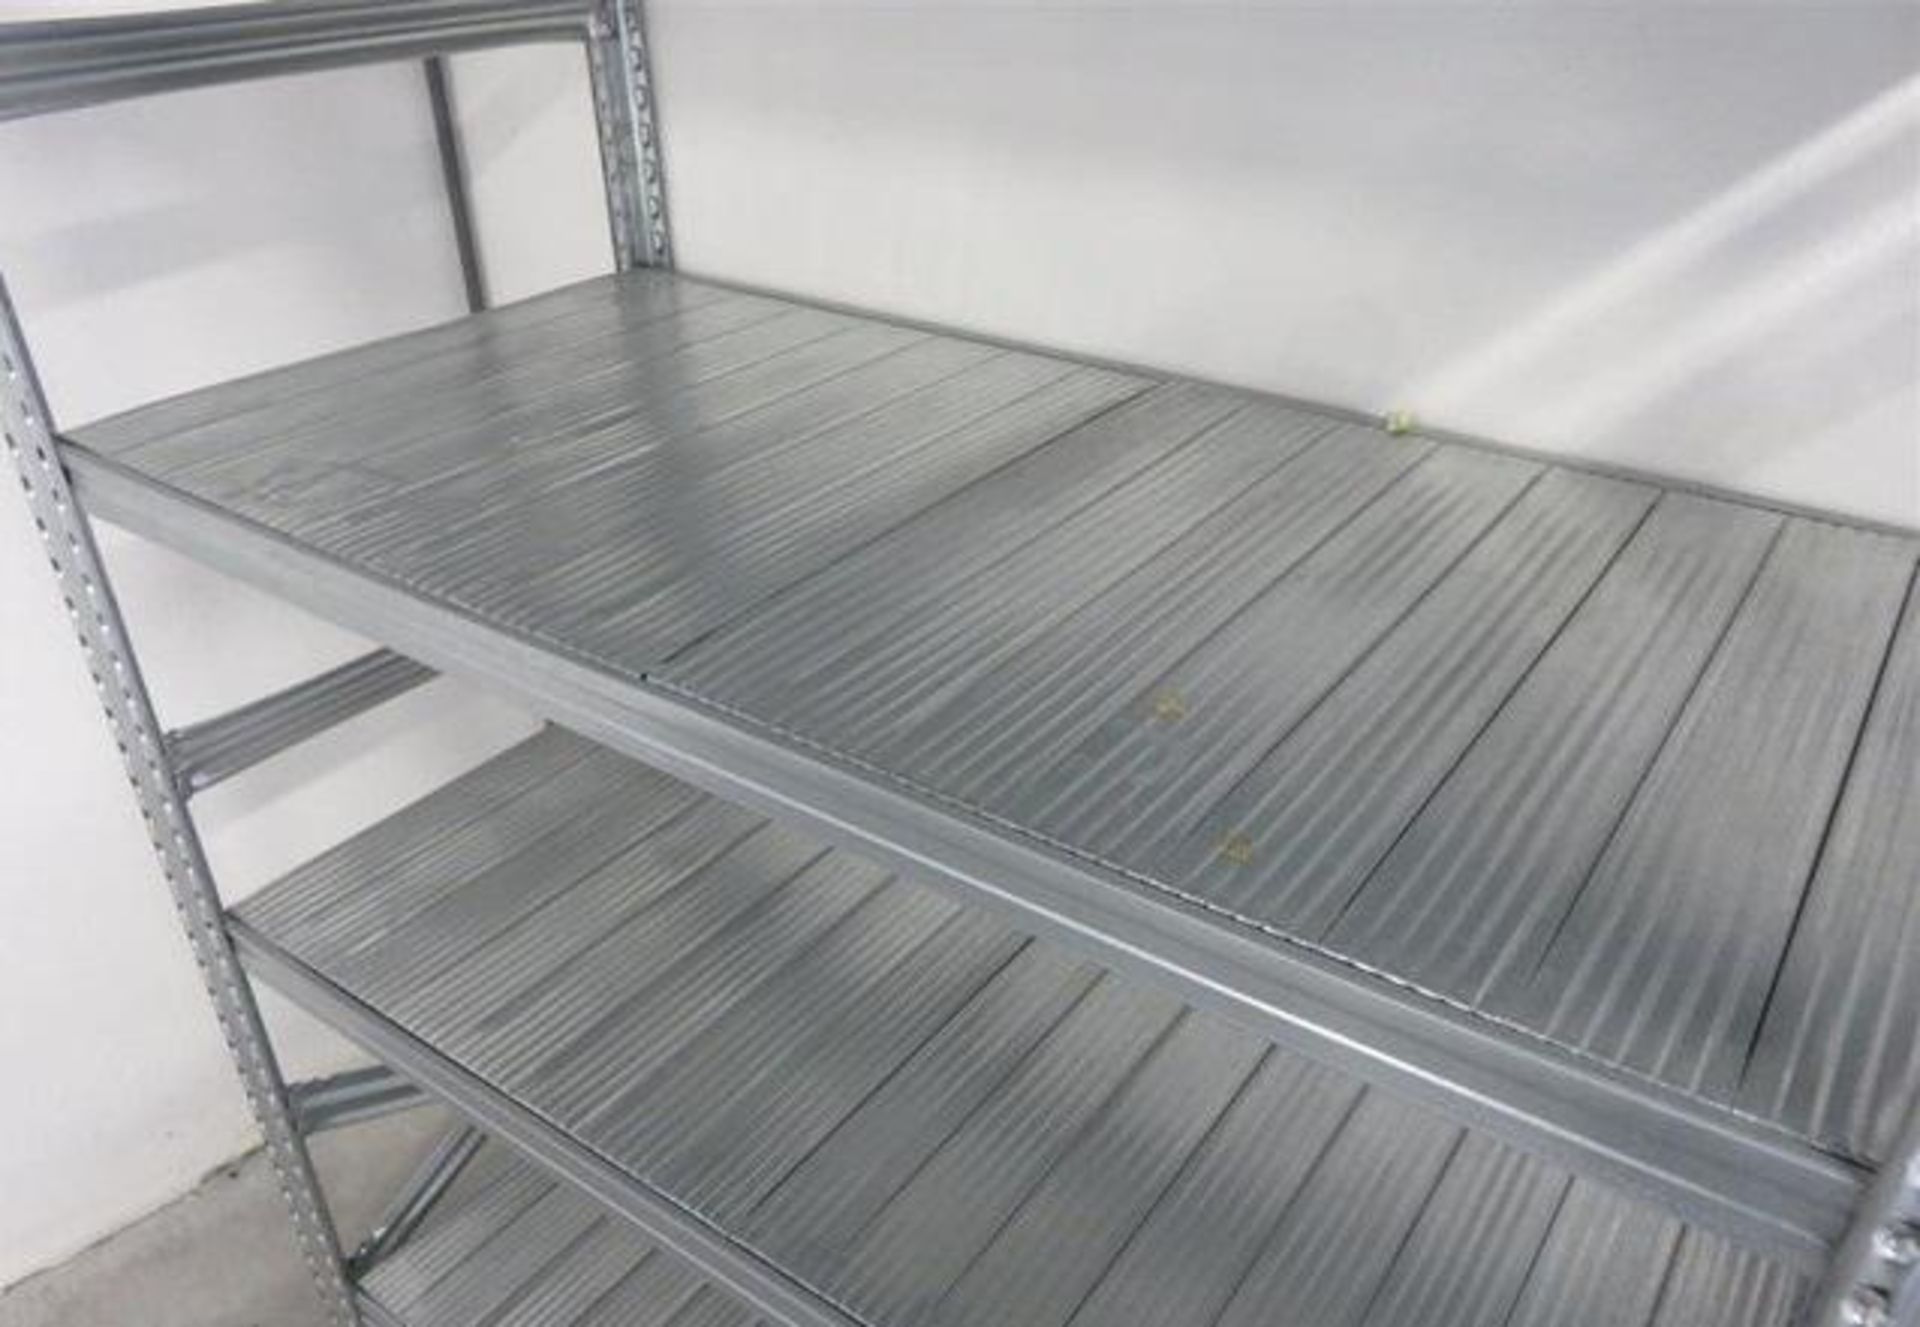 4 x Bays of Metalsistem Steel Modular Storage Shelving - Includes 29 Pieces - Recently Removed - Image 12 of 17